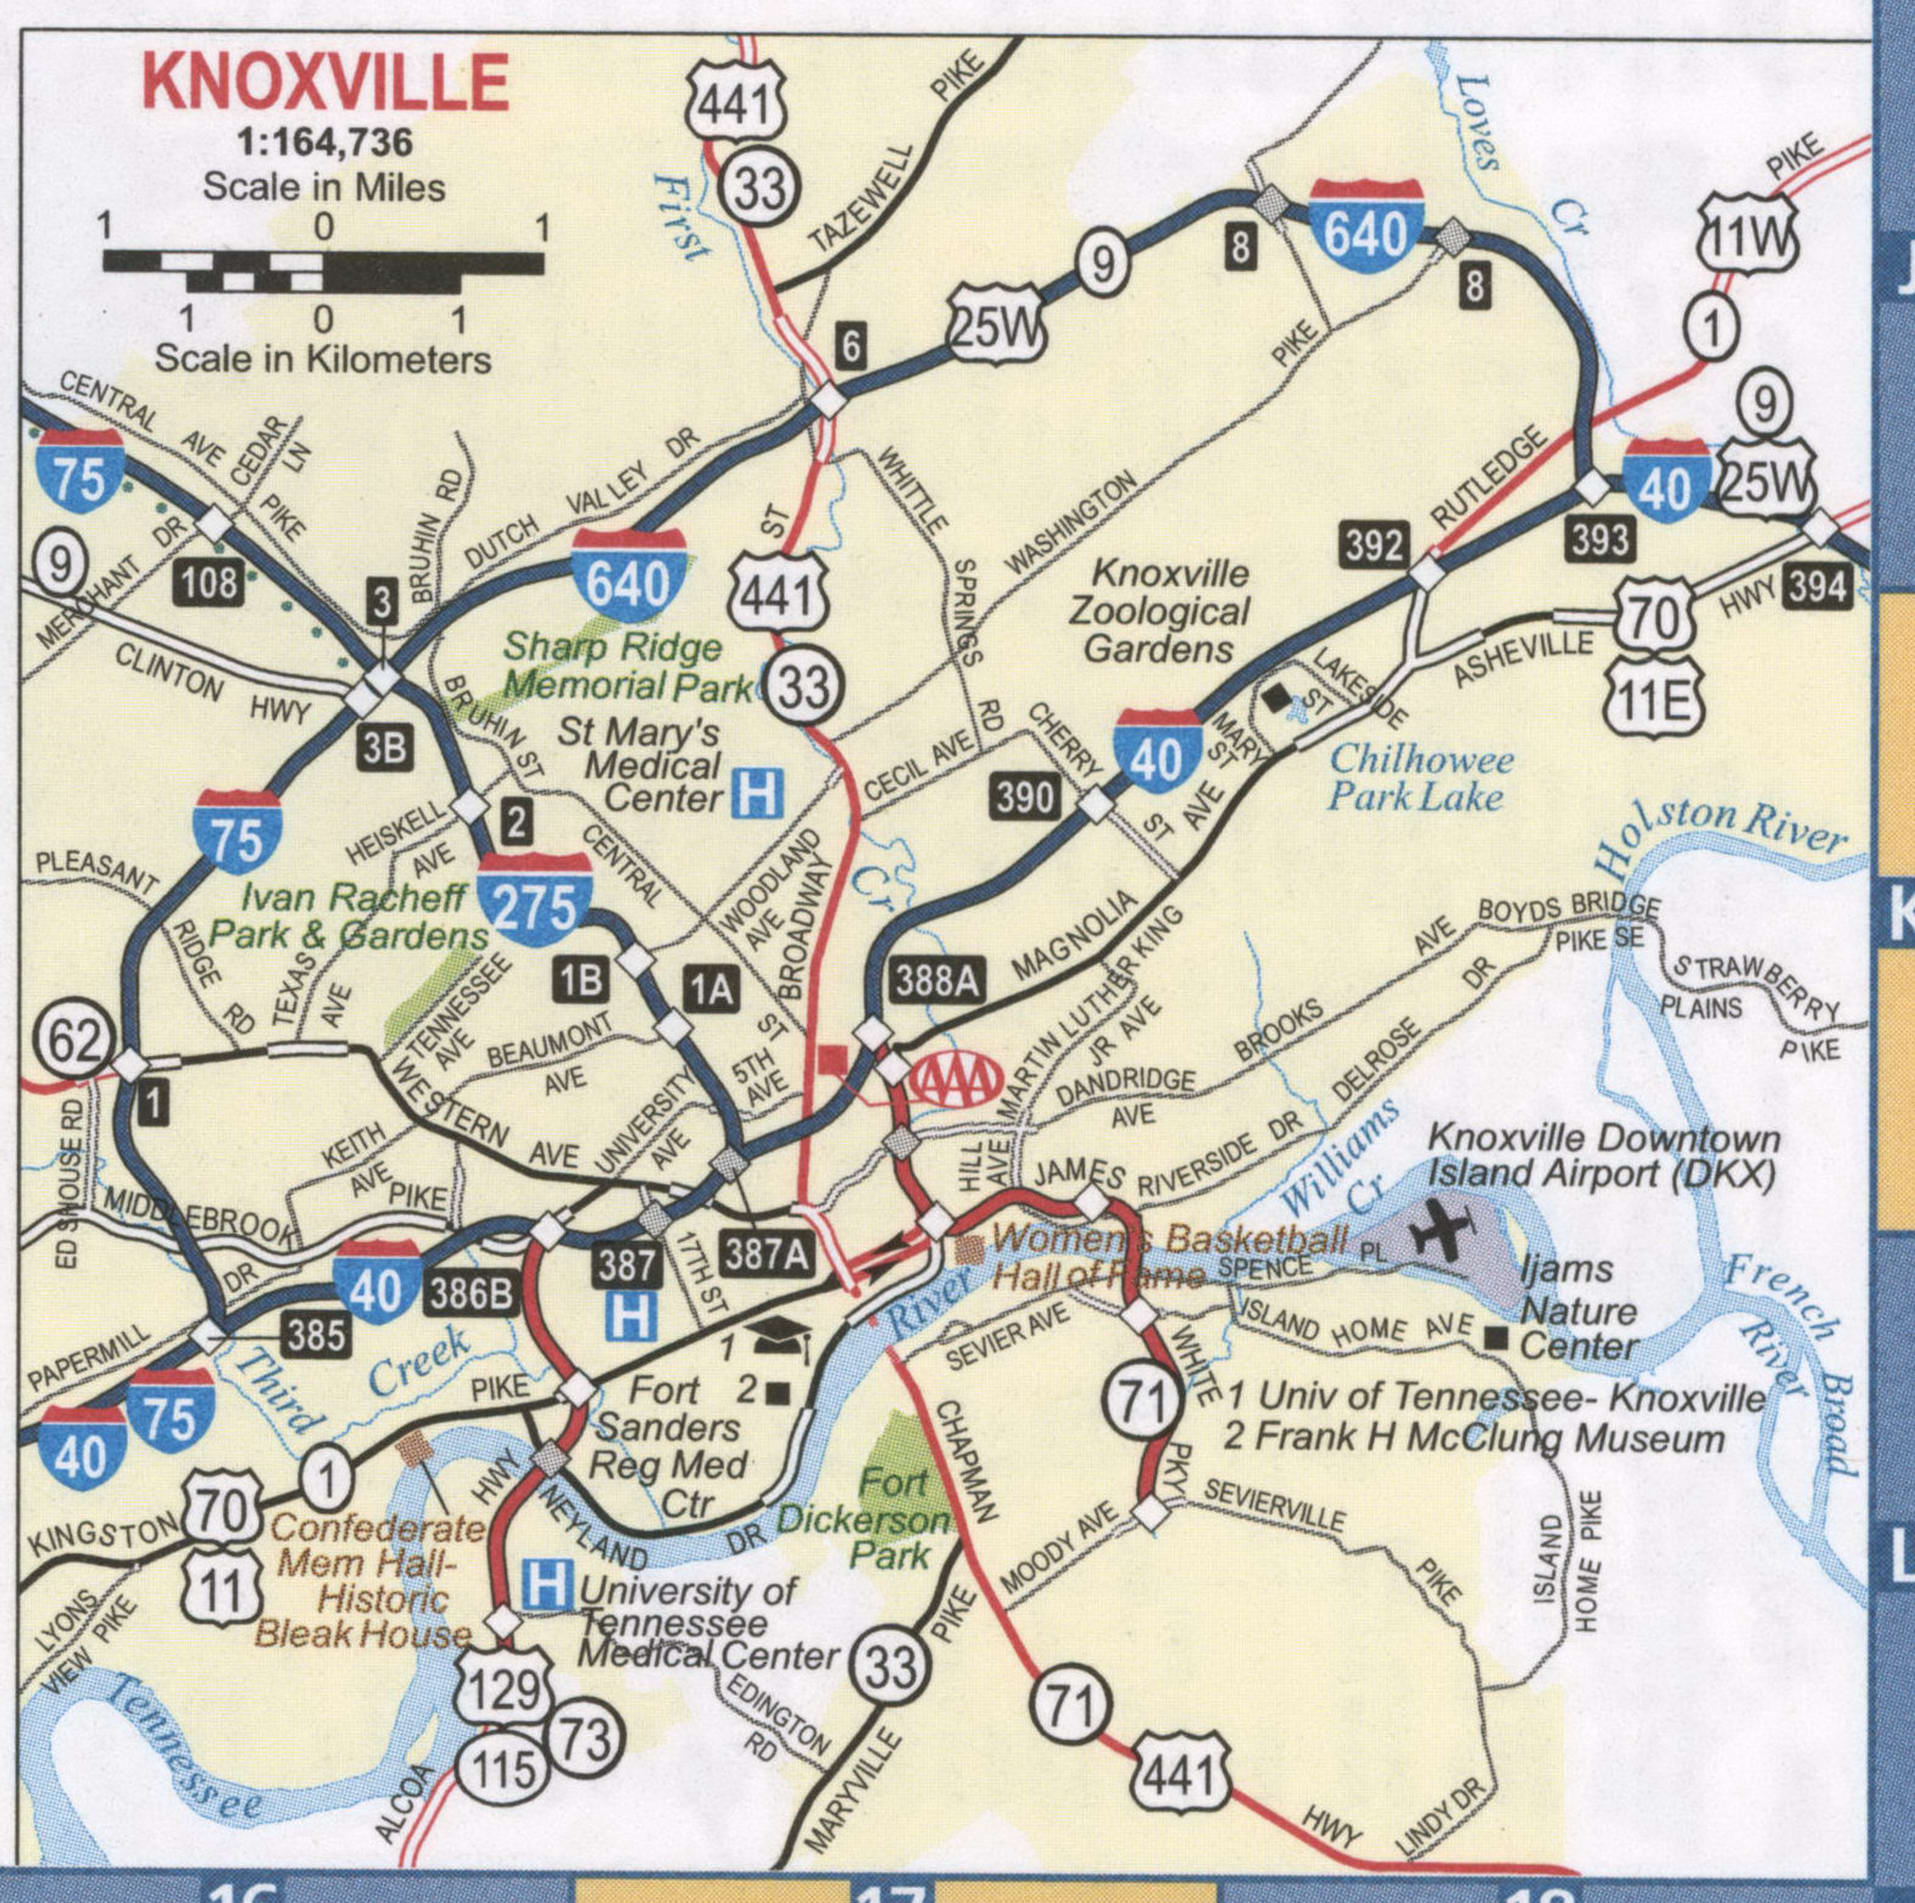 Knoxville road map